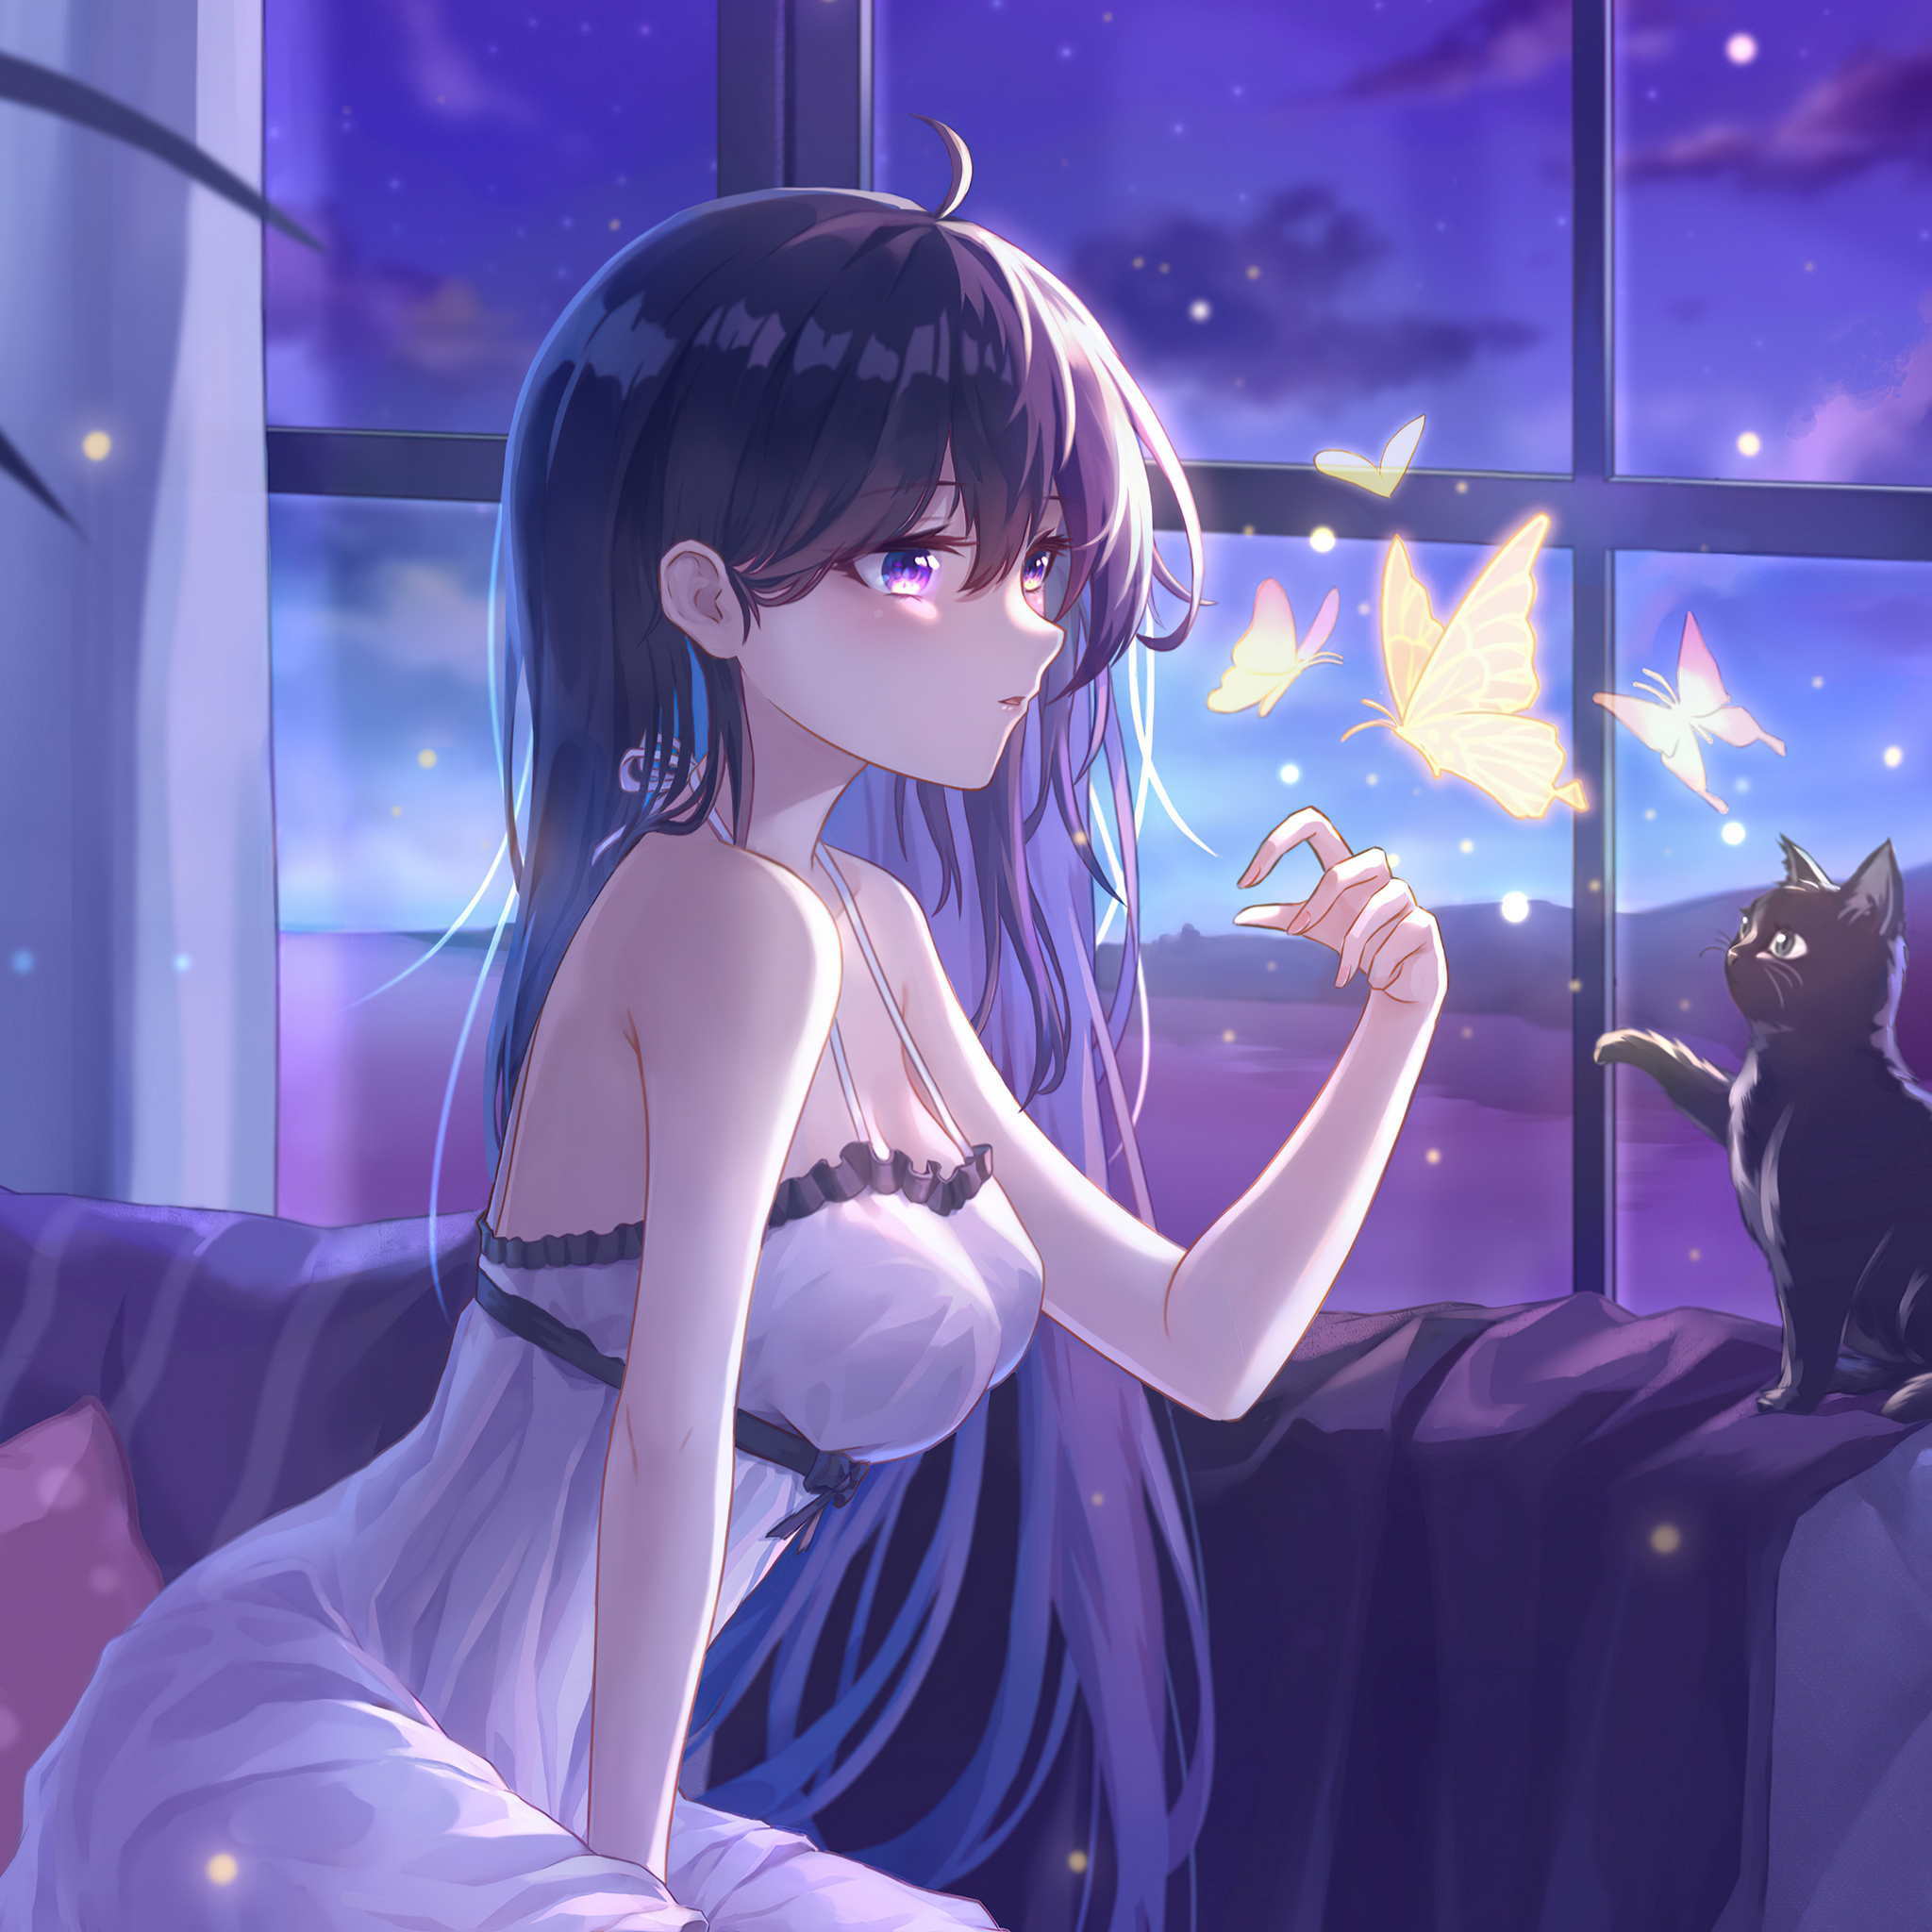 anime-girl-with-cats-4k-rx.jpg